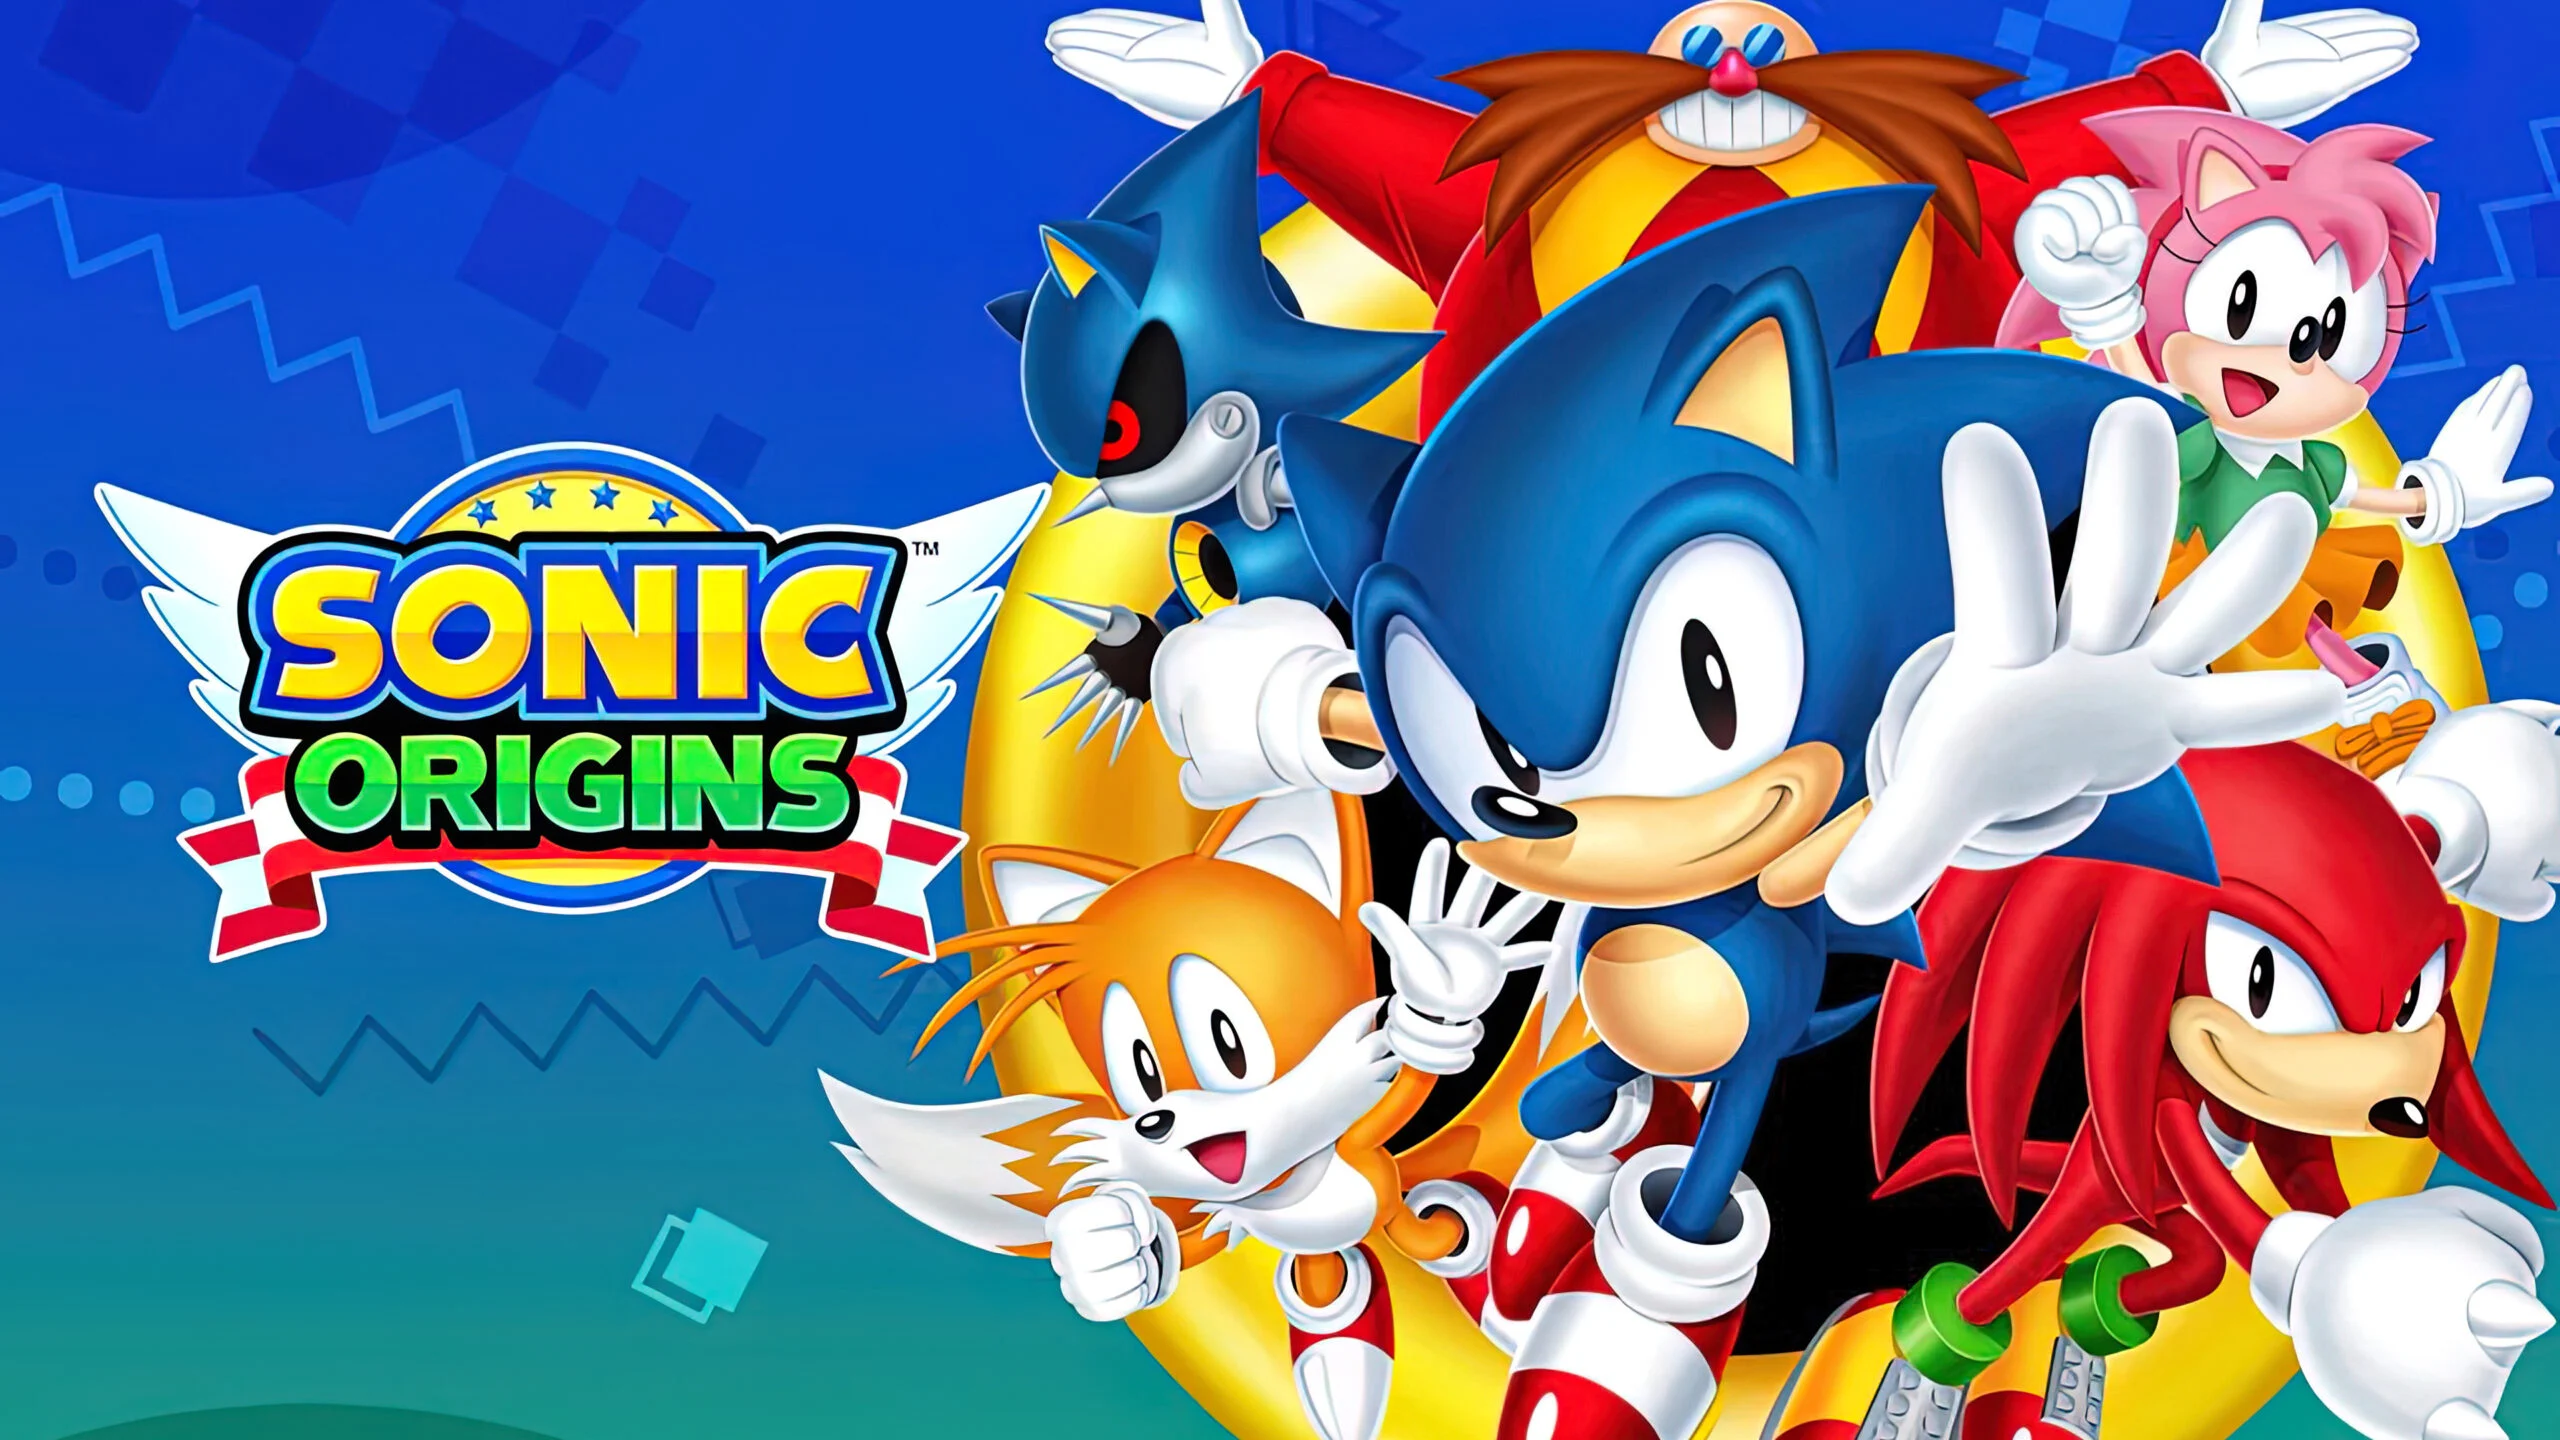 Sonic Origins Release Date Officially Announced